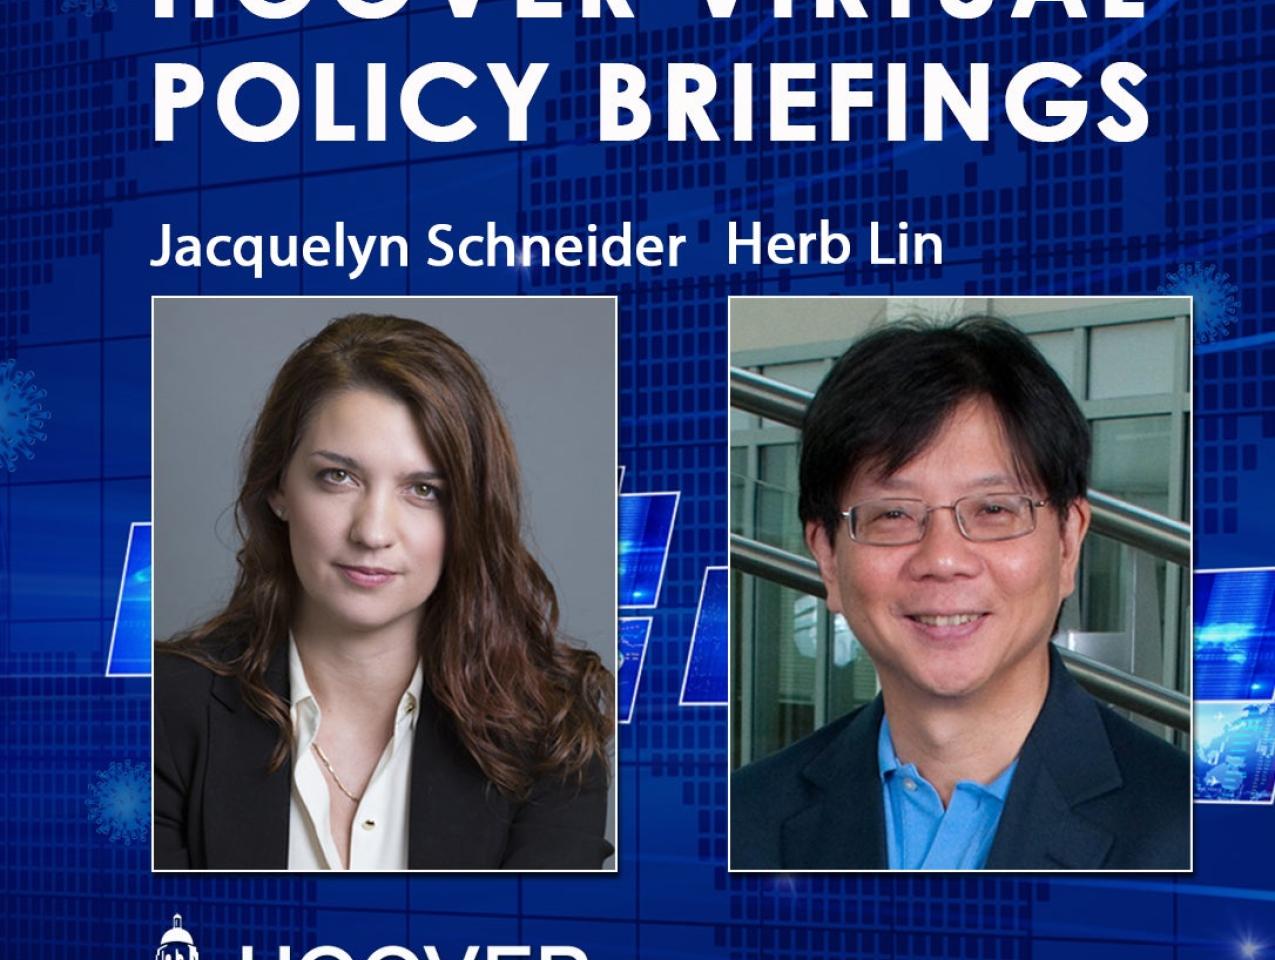 Image for Jacquelyn Schneider And Herb Lin: Cyber Power And Peril In The Post-COVID World